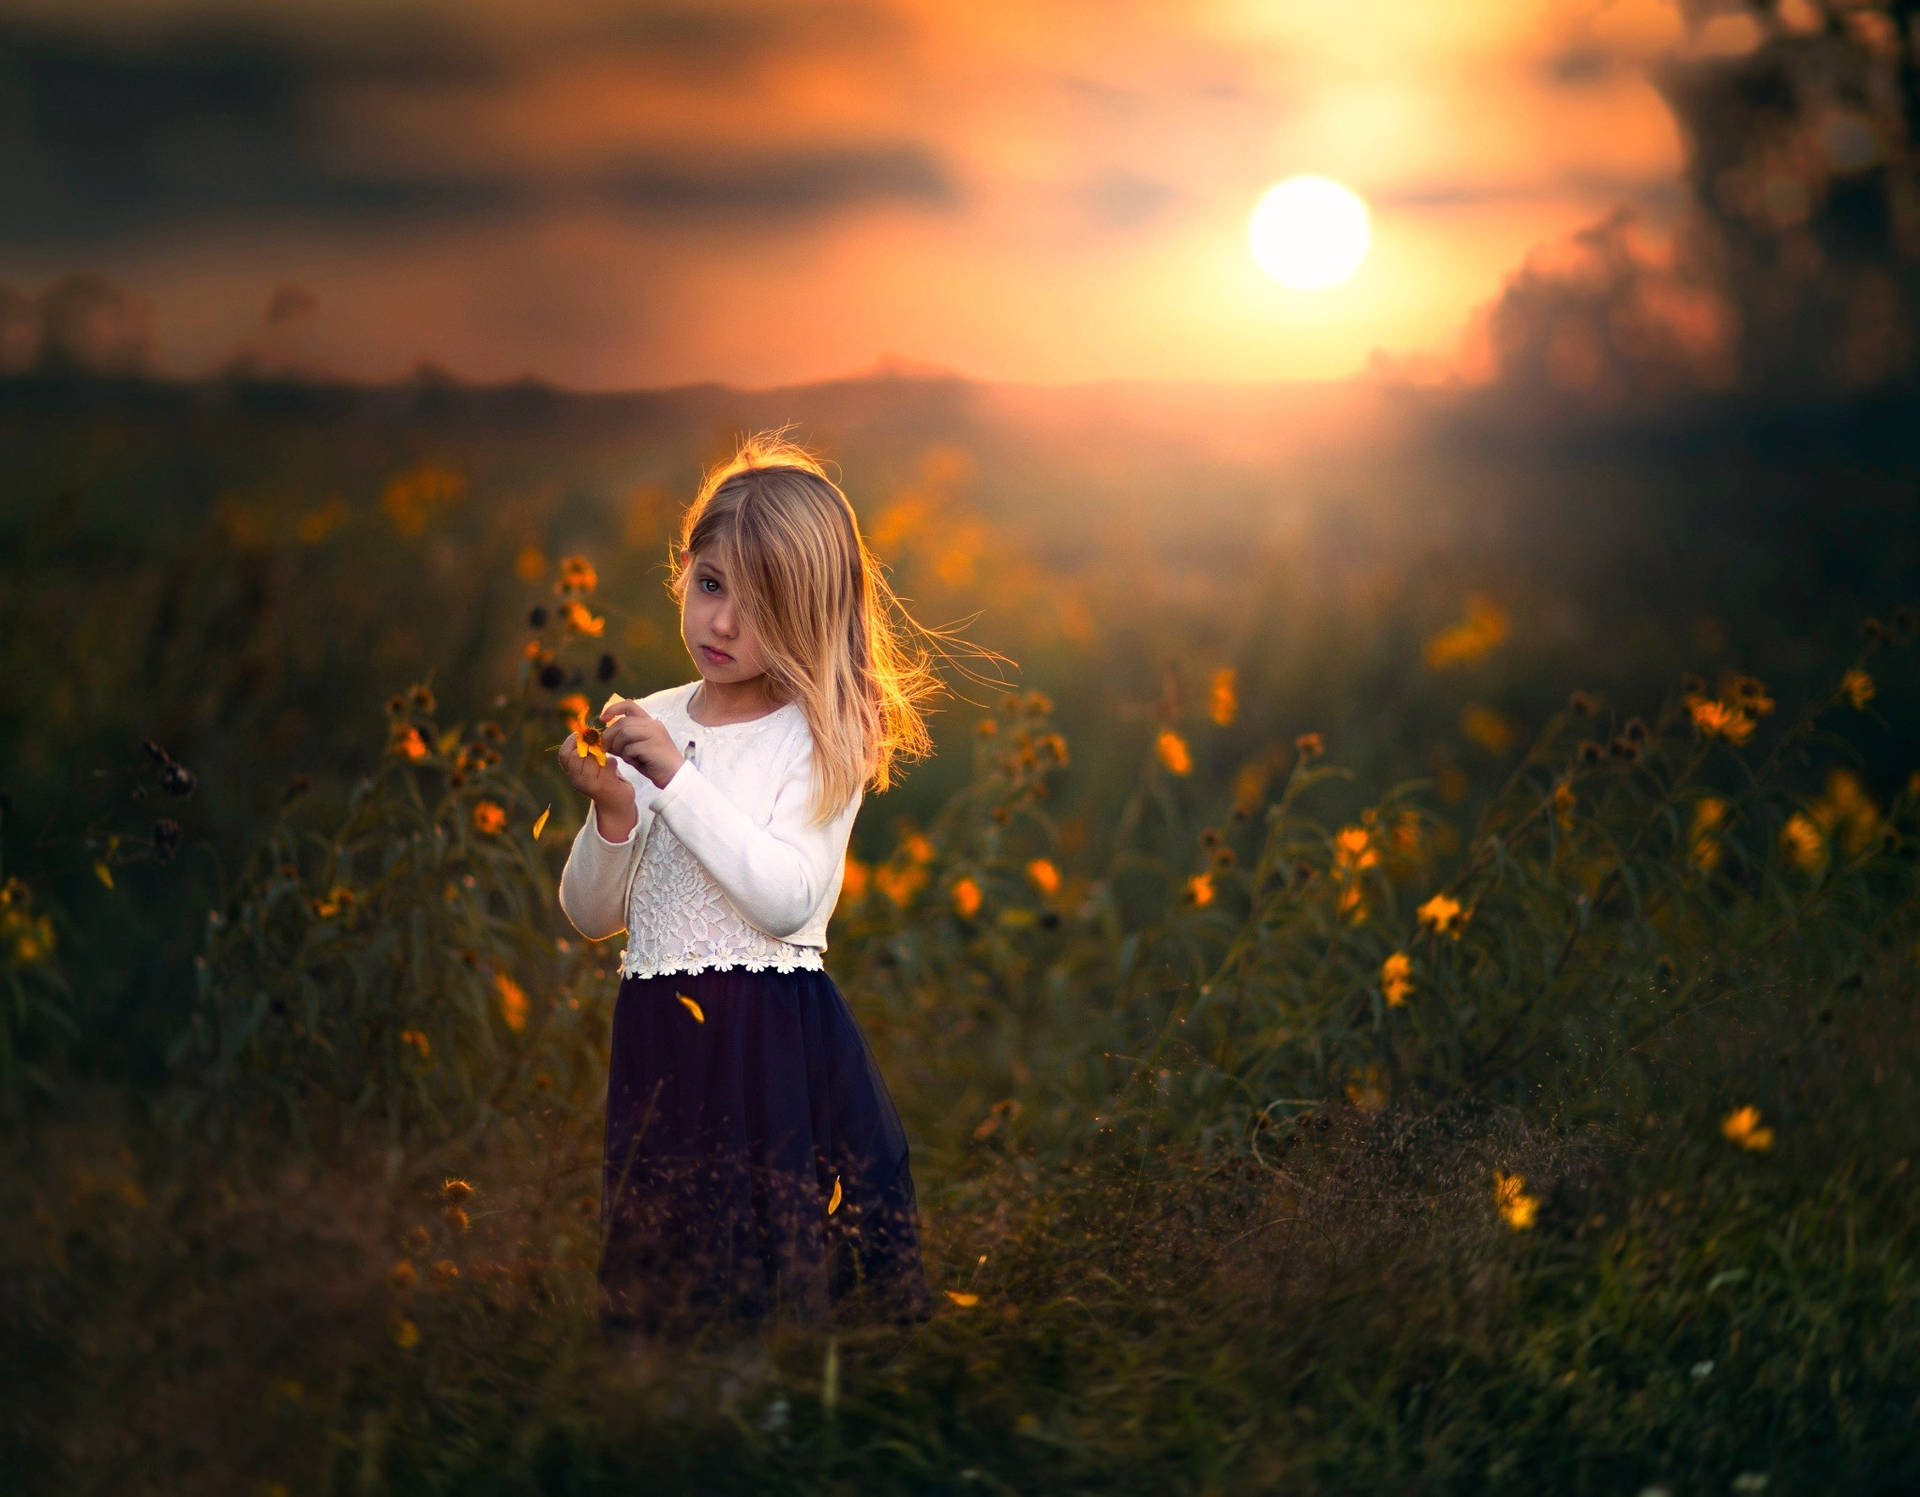 Sad Child And Flowers At Sunset Wallpaper